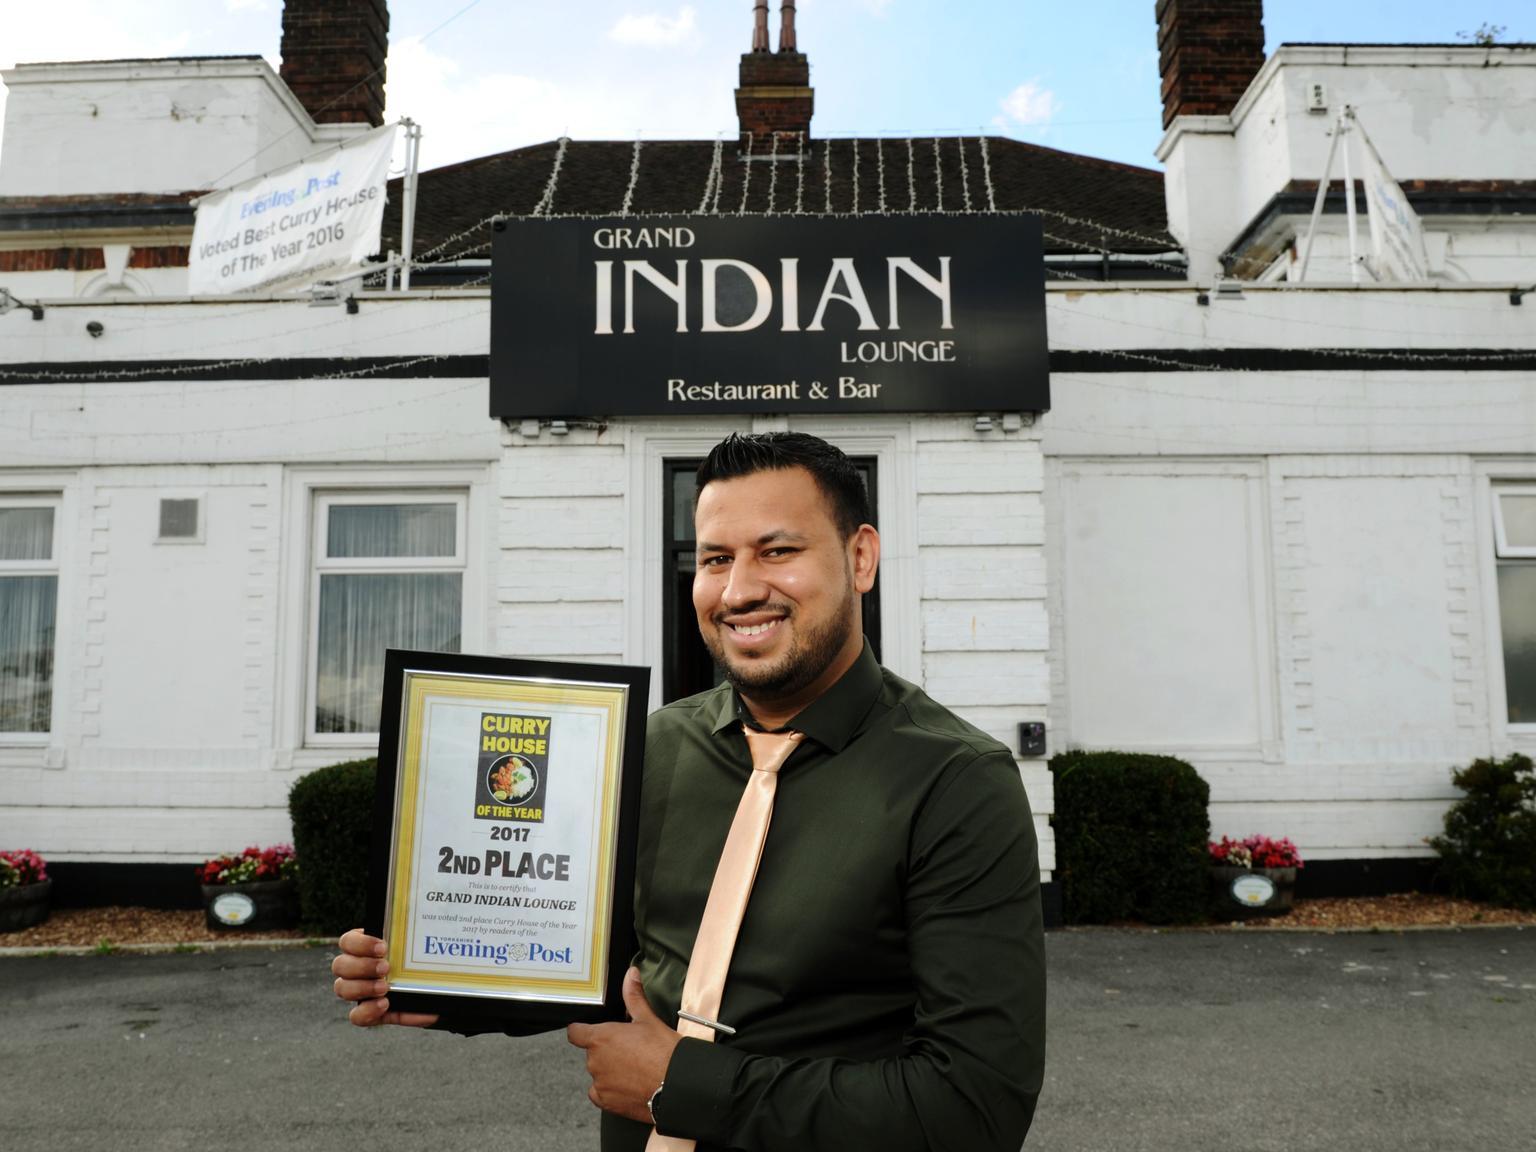 Grand Indian Lounge, in Wakefield Road, has a rating of 4.6 stars from 452 Google reviews. A customer at Grand Indian Lounge said: “Just got back from a beautiful meal here. Was recommended by a friend who's been going for years. Amazing food, fantastic friendly staff, will be definitely be back again soon and will recommend to everyone!!” 